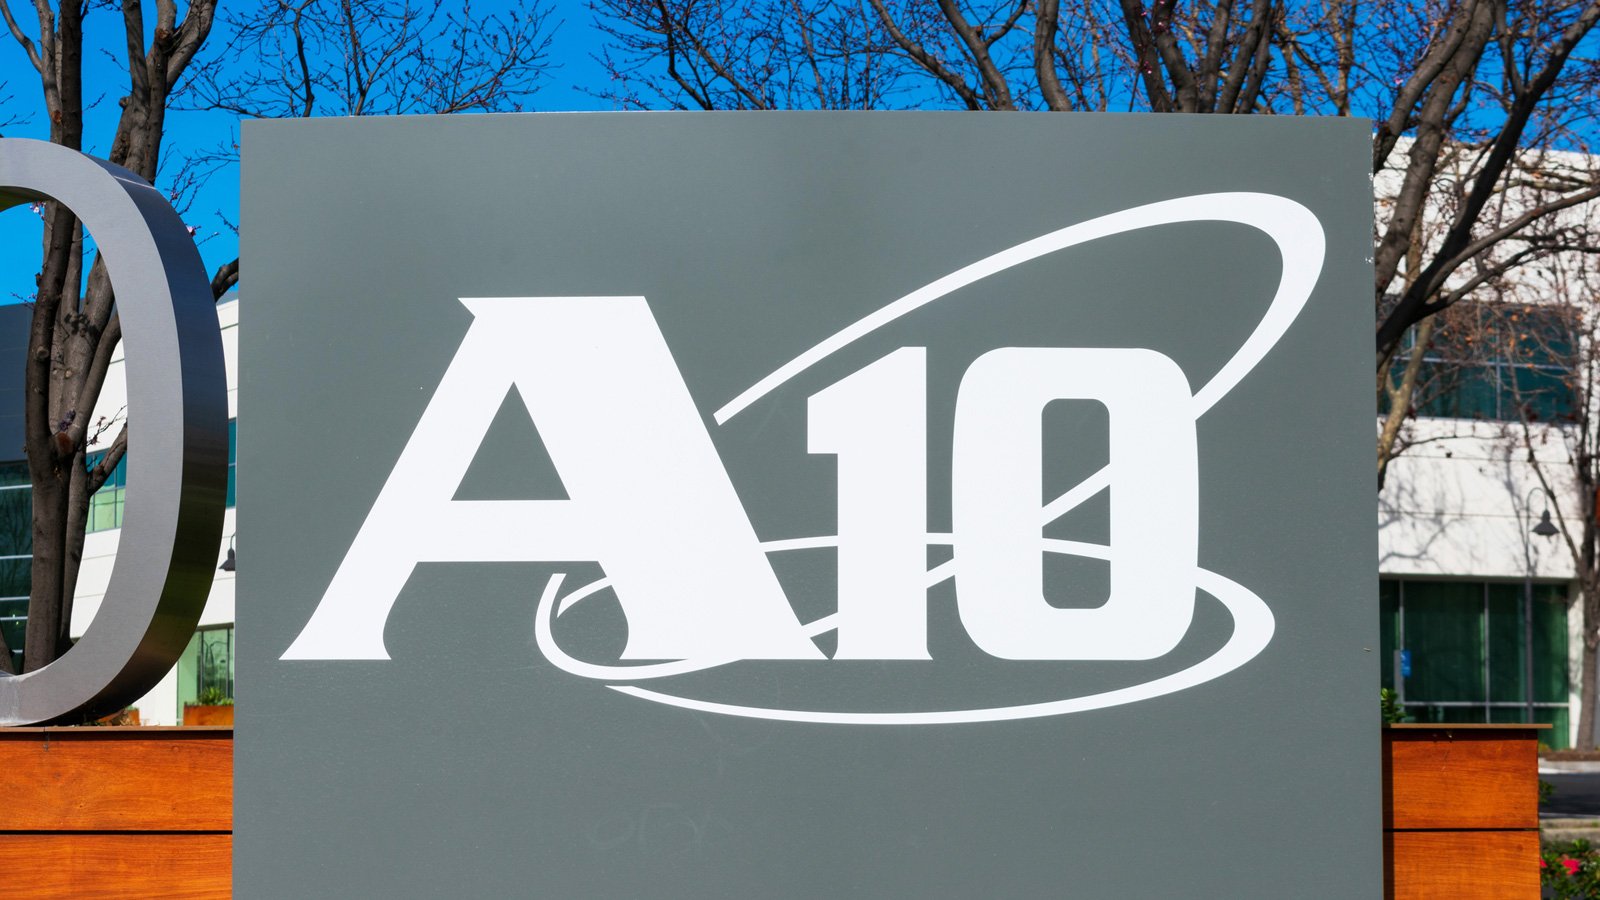 A10 networks sign